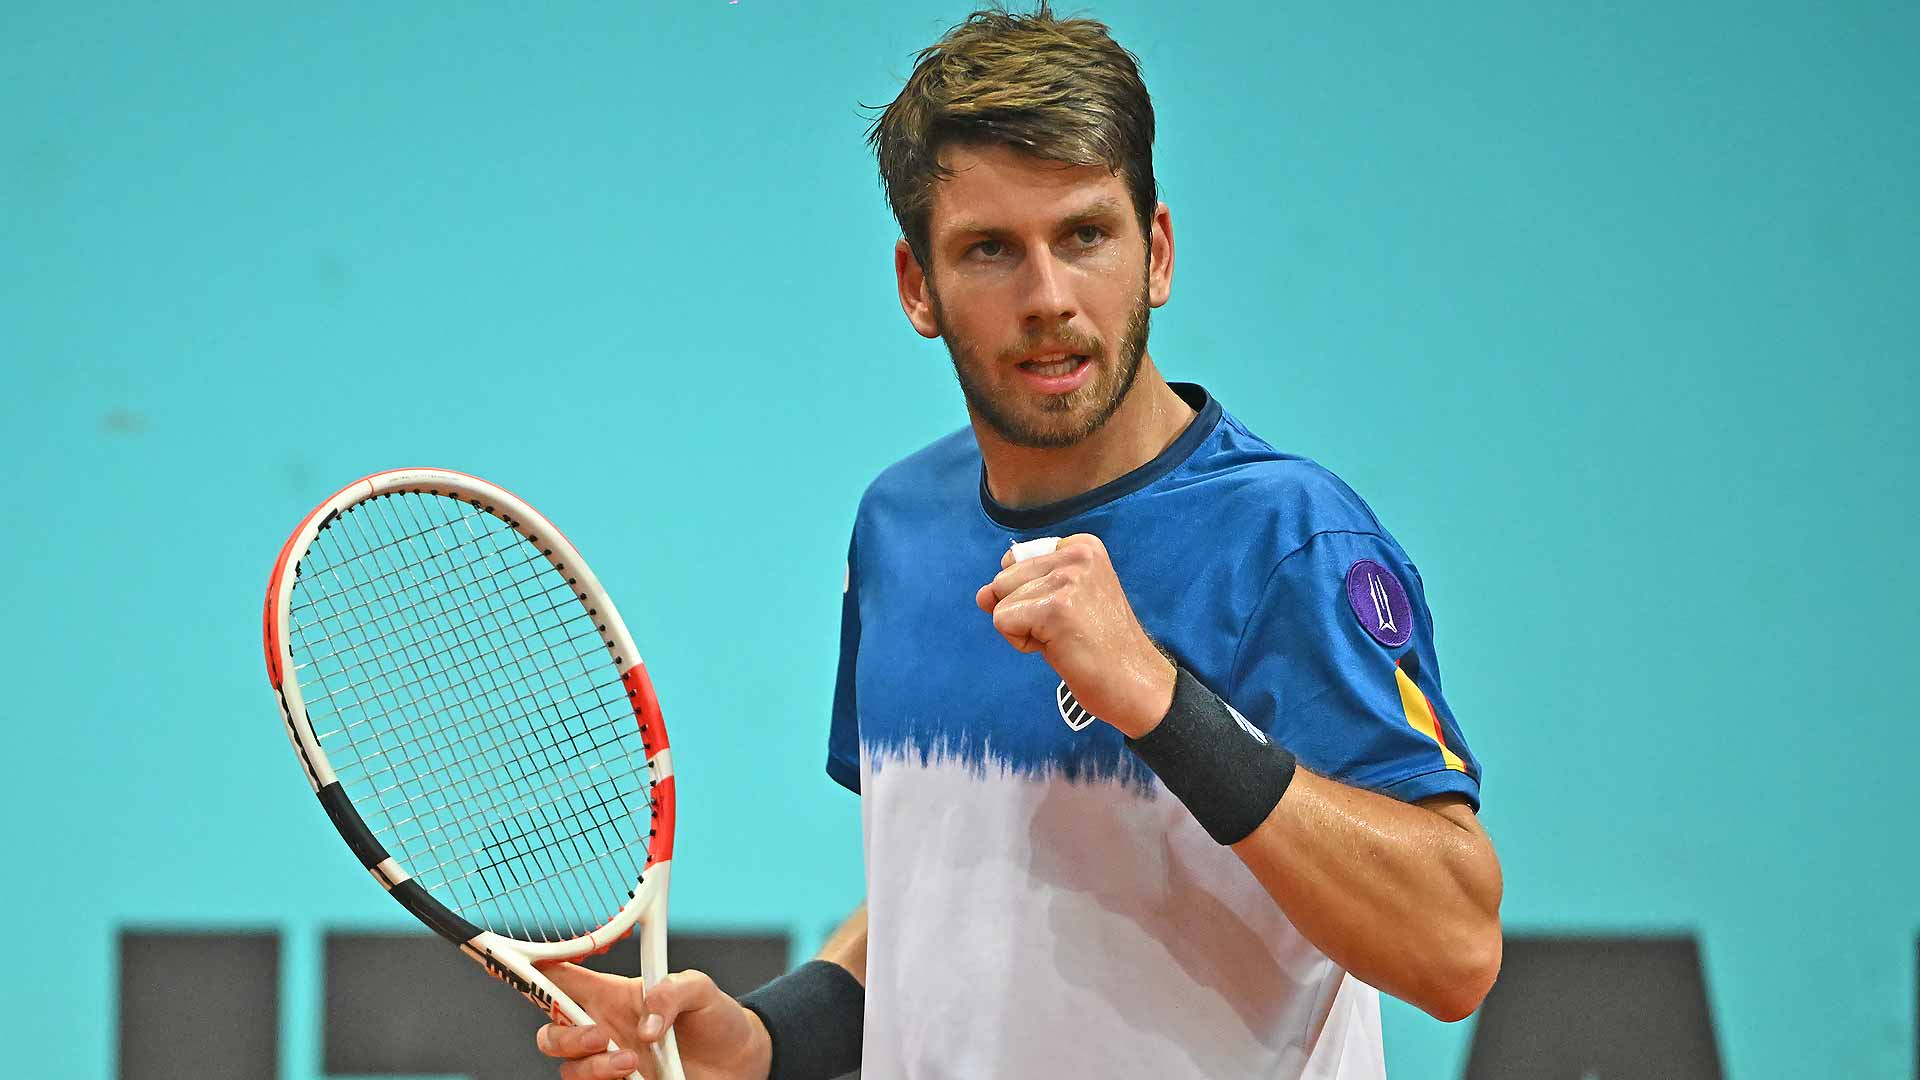 Cameron Norrie converts four of his seven break points to defeat Soonwoo Kwon on Monday in Madrid.